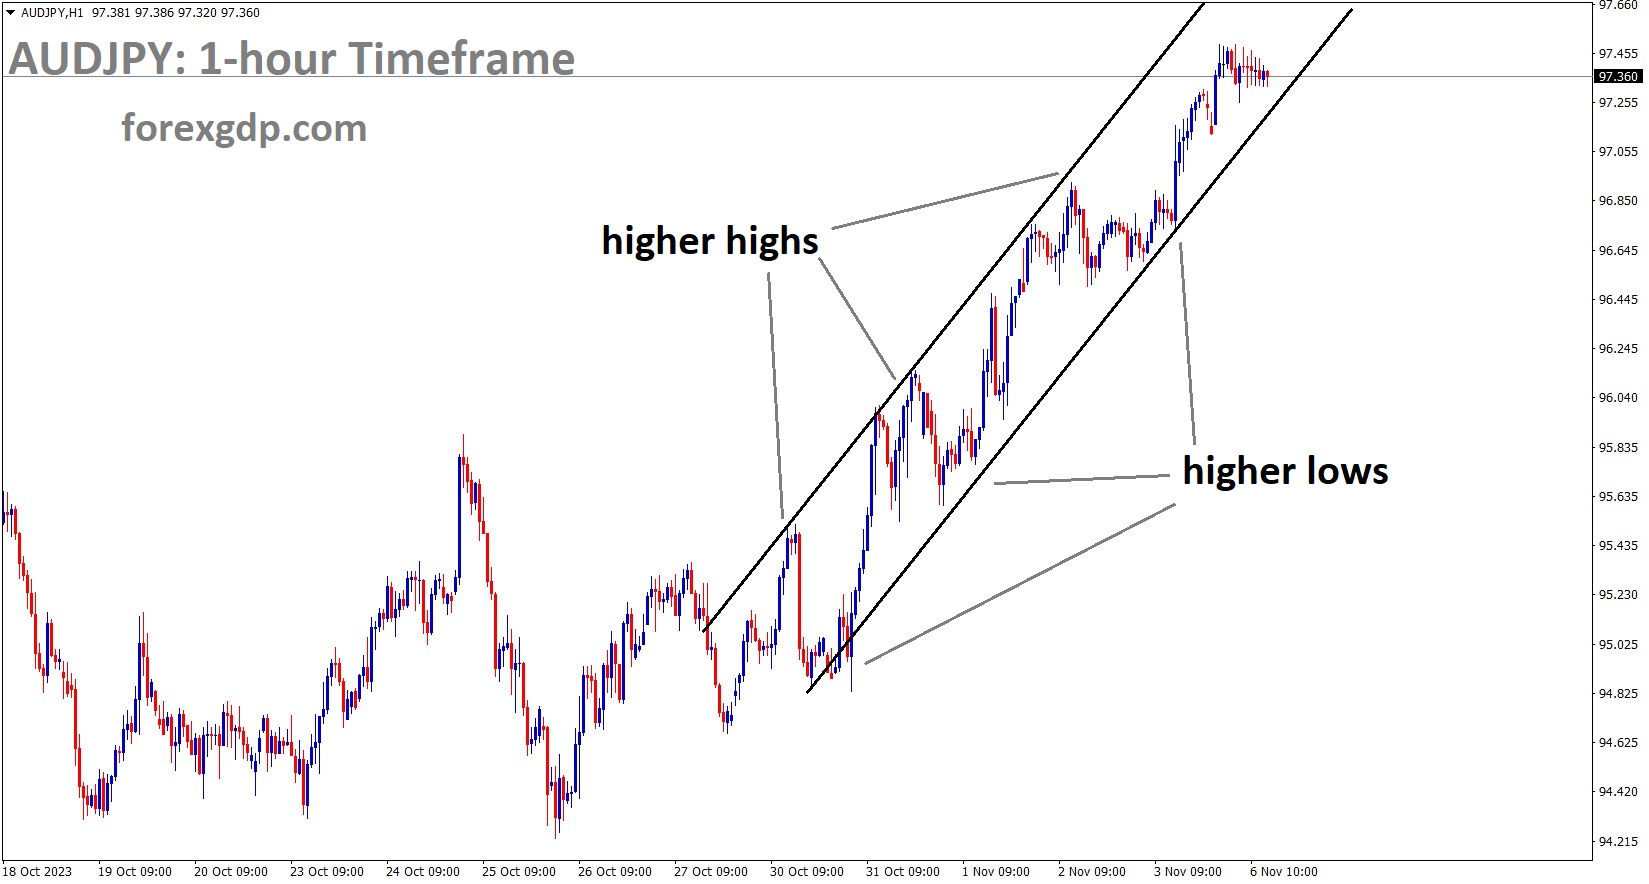 AUDJPY H1 TF Analysis Market is moving in an Ascending channel and the market has reached the higher high area of the channel